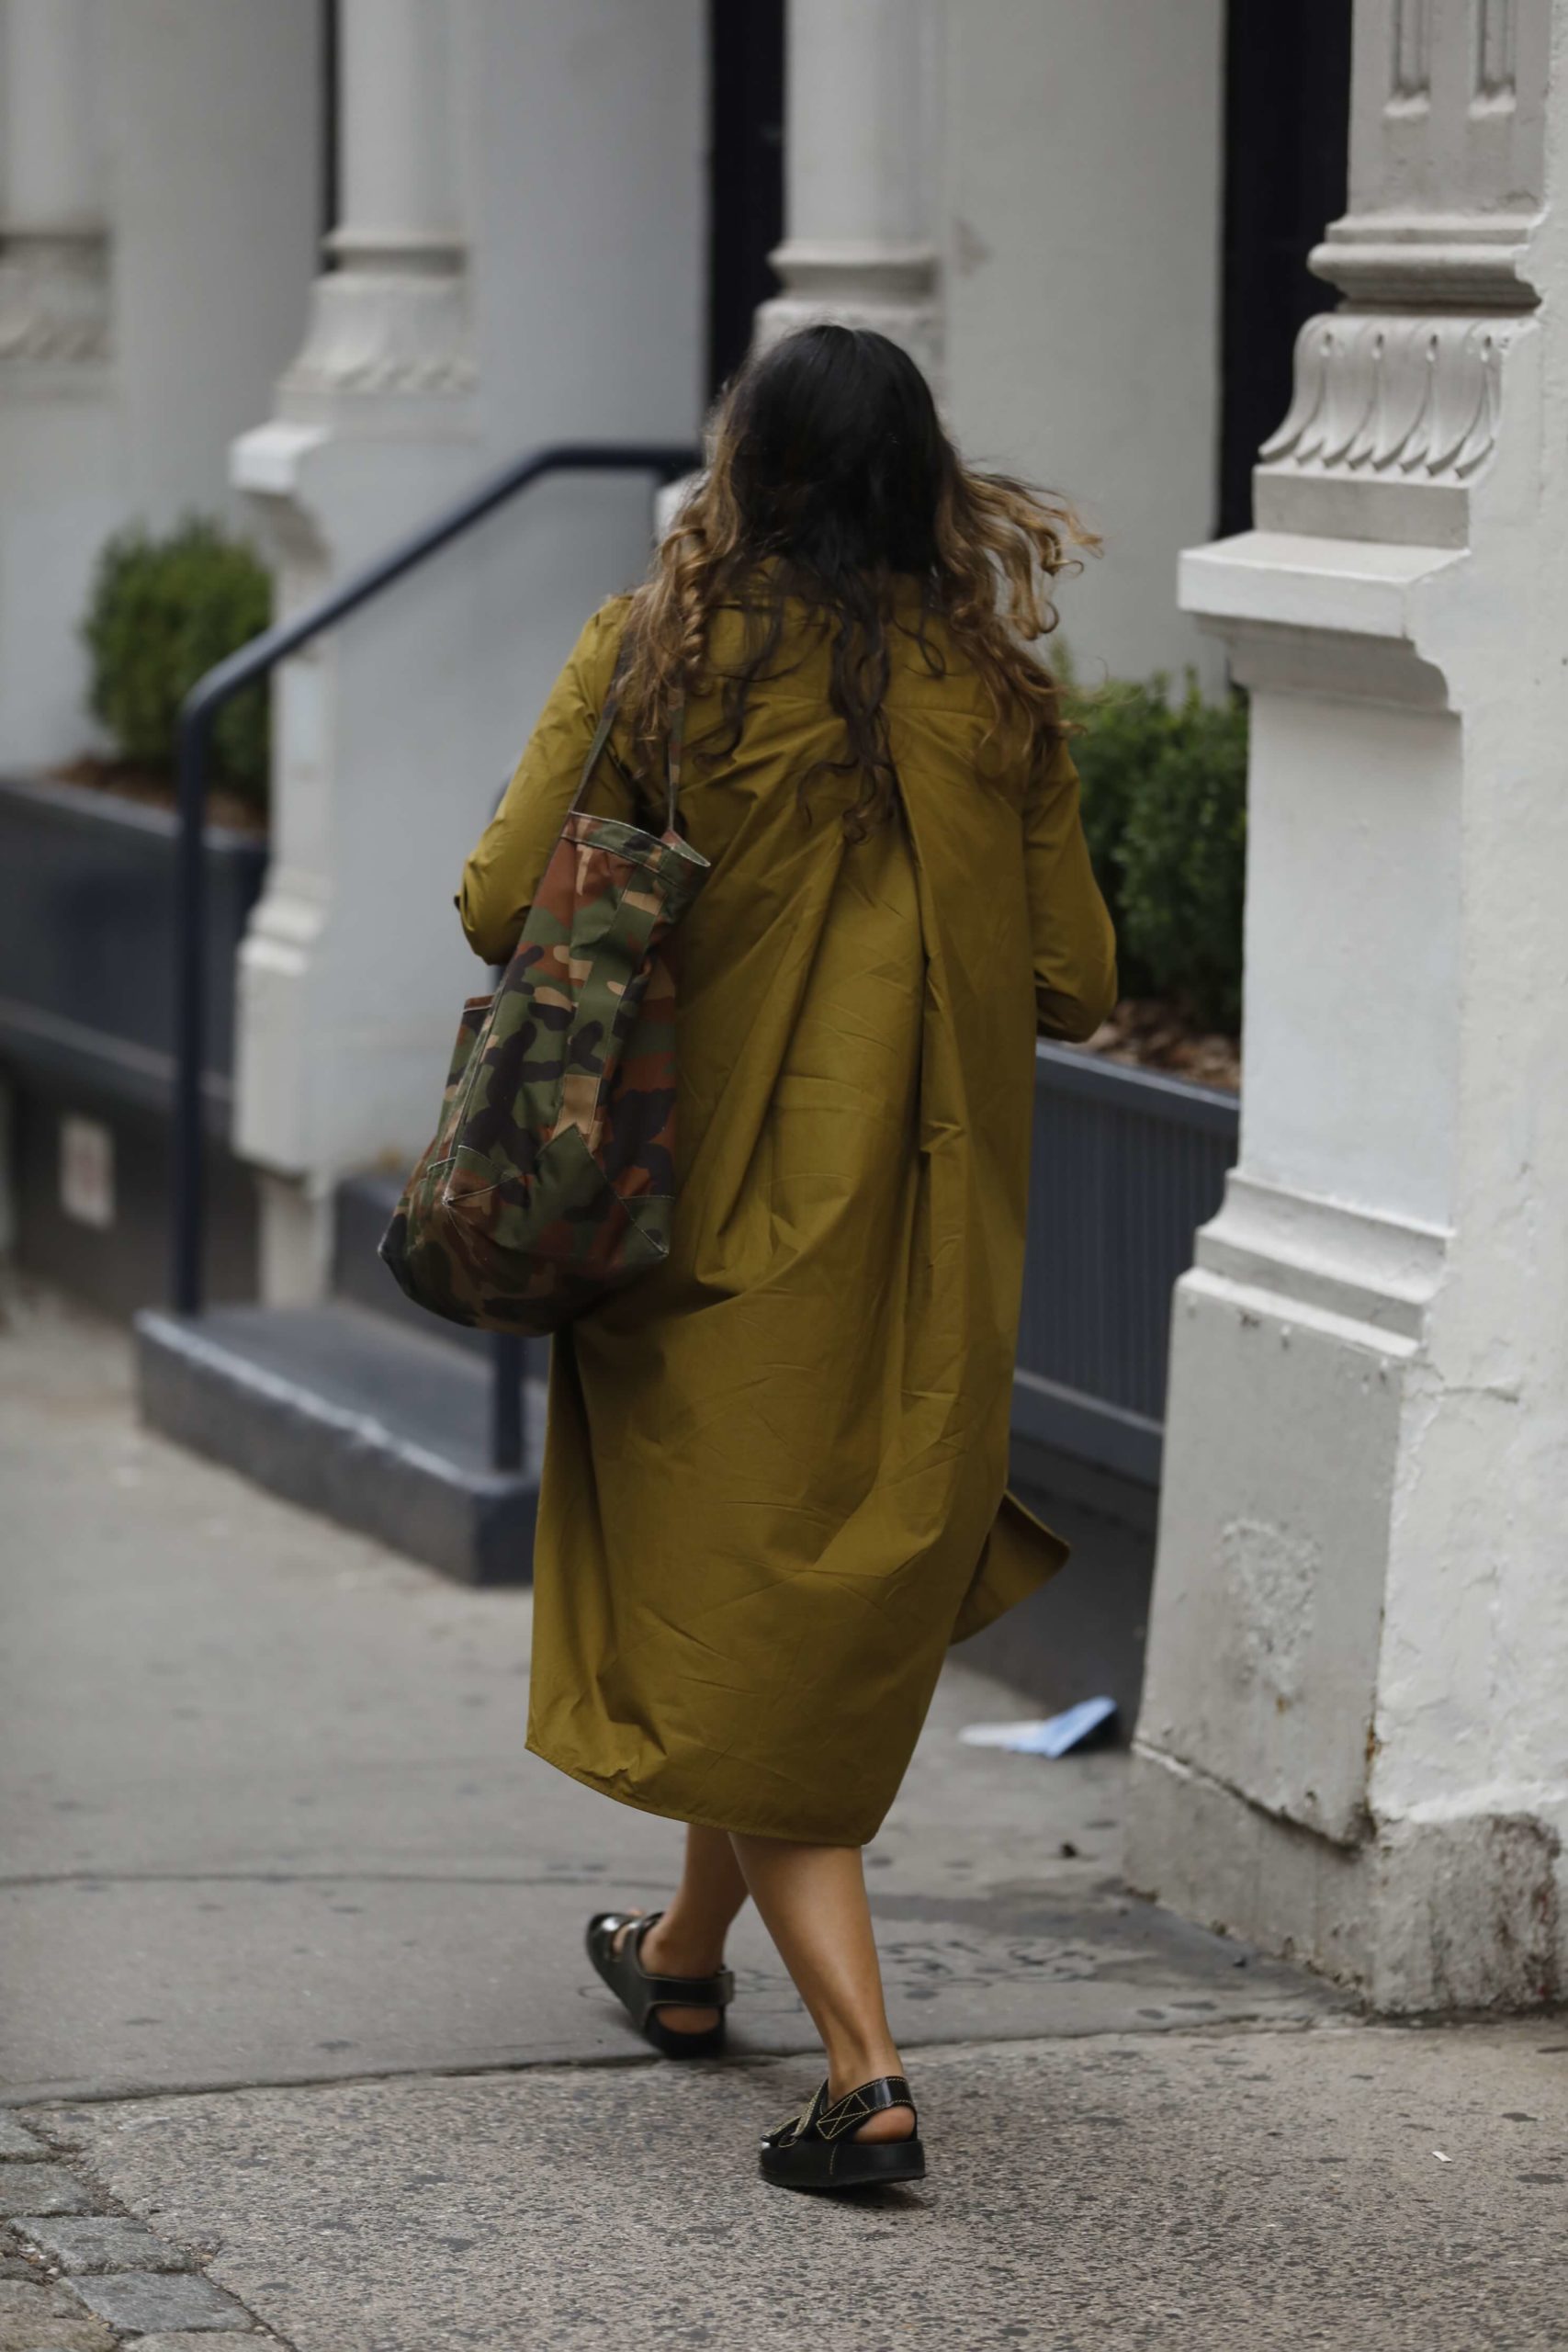 Mercer Hotel / Street Style, olive and camo